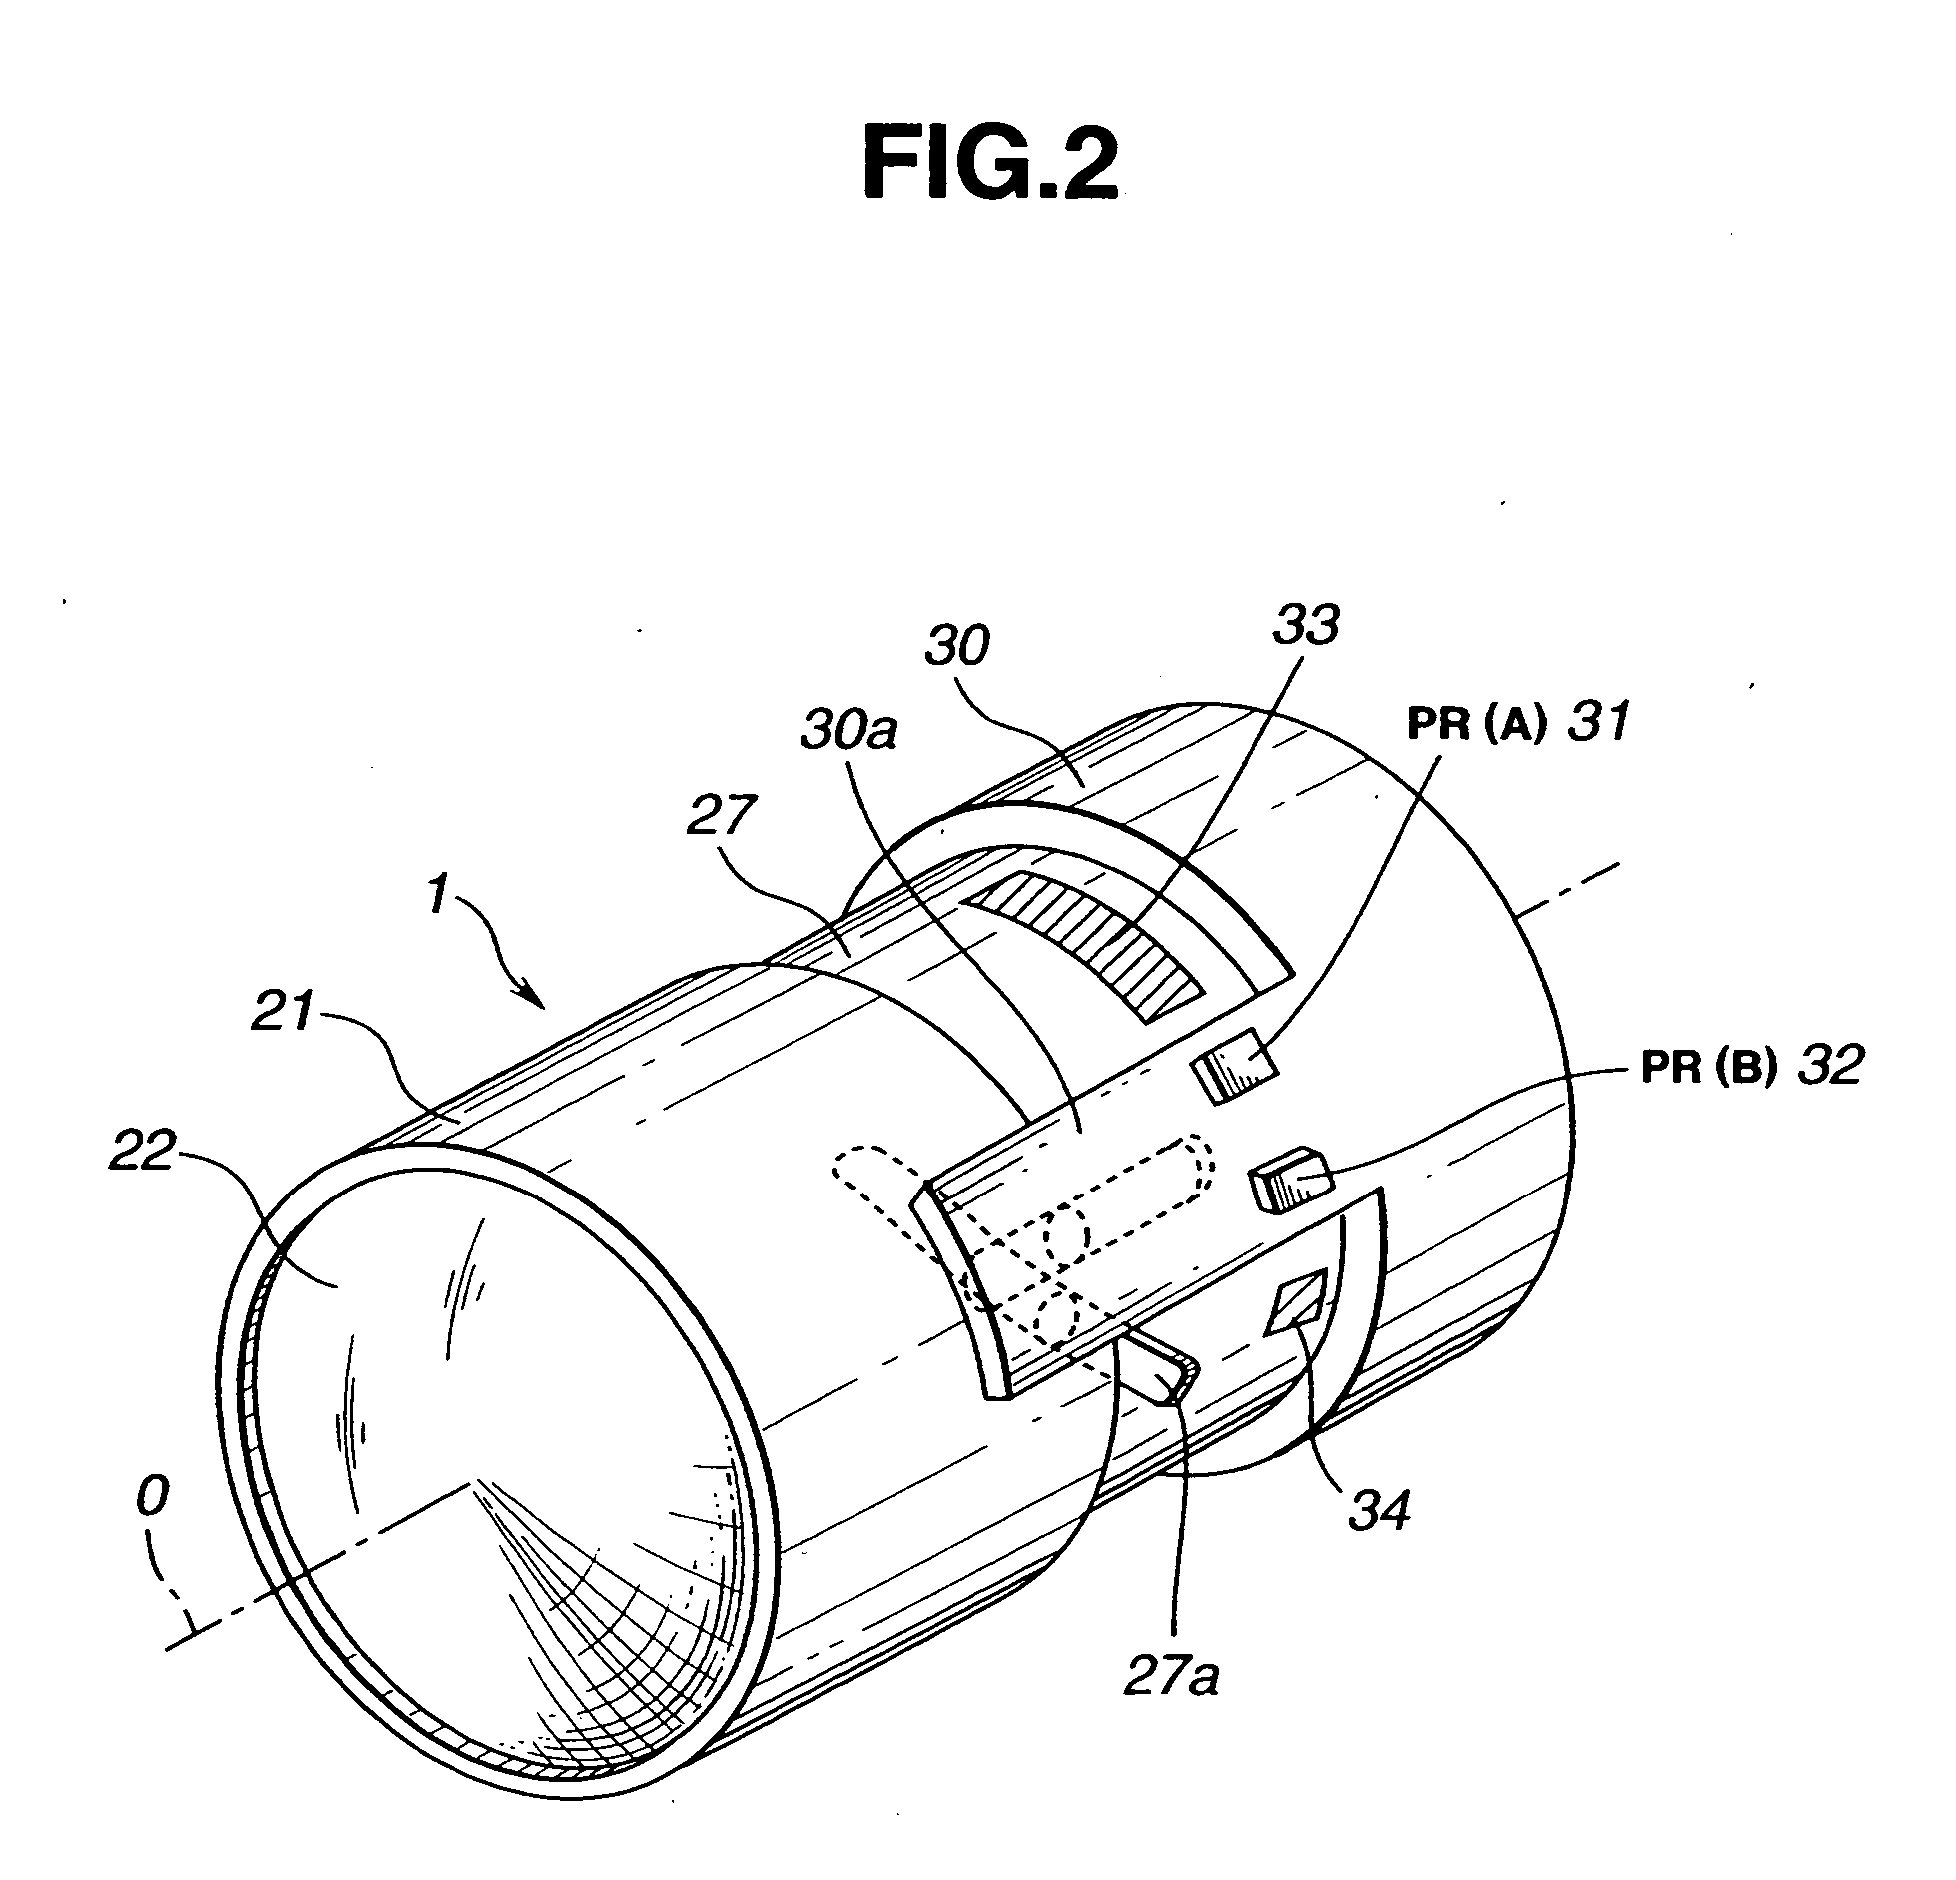 Lens device for a camera with a stepping motor drive optimized for speed and power saving